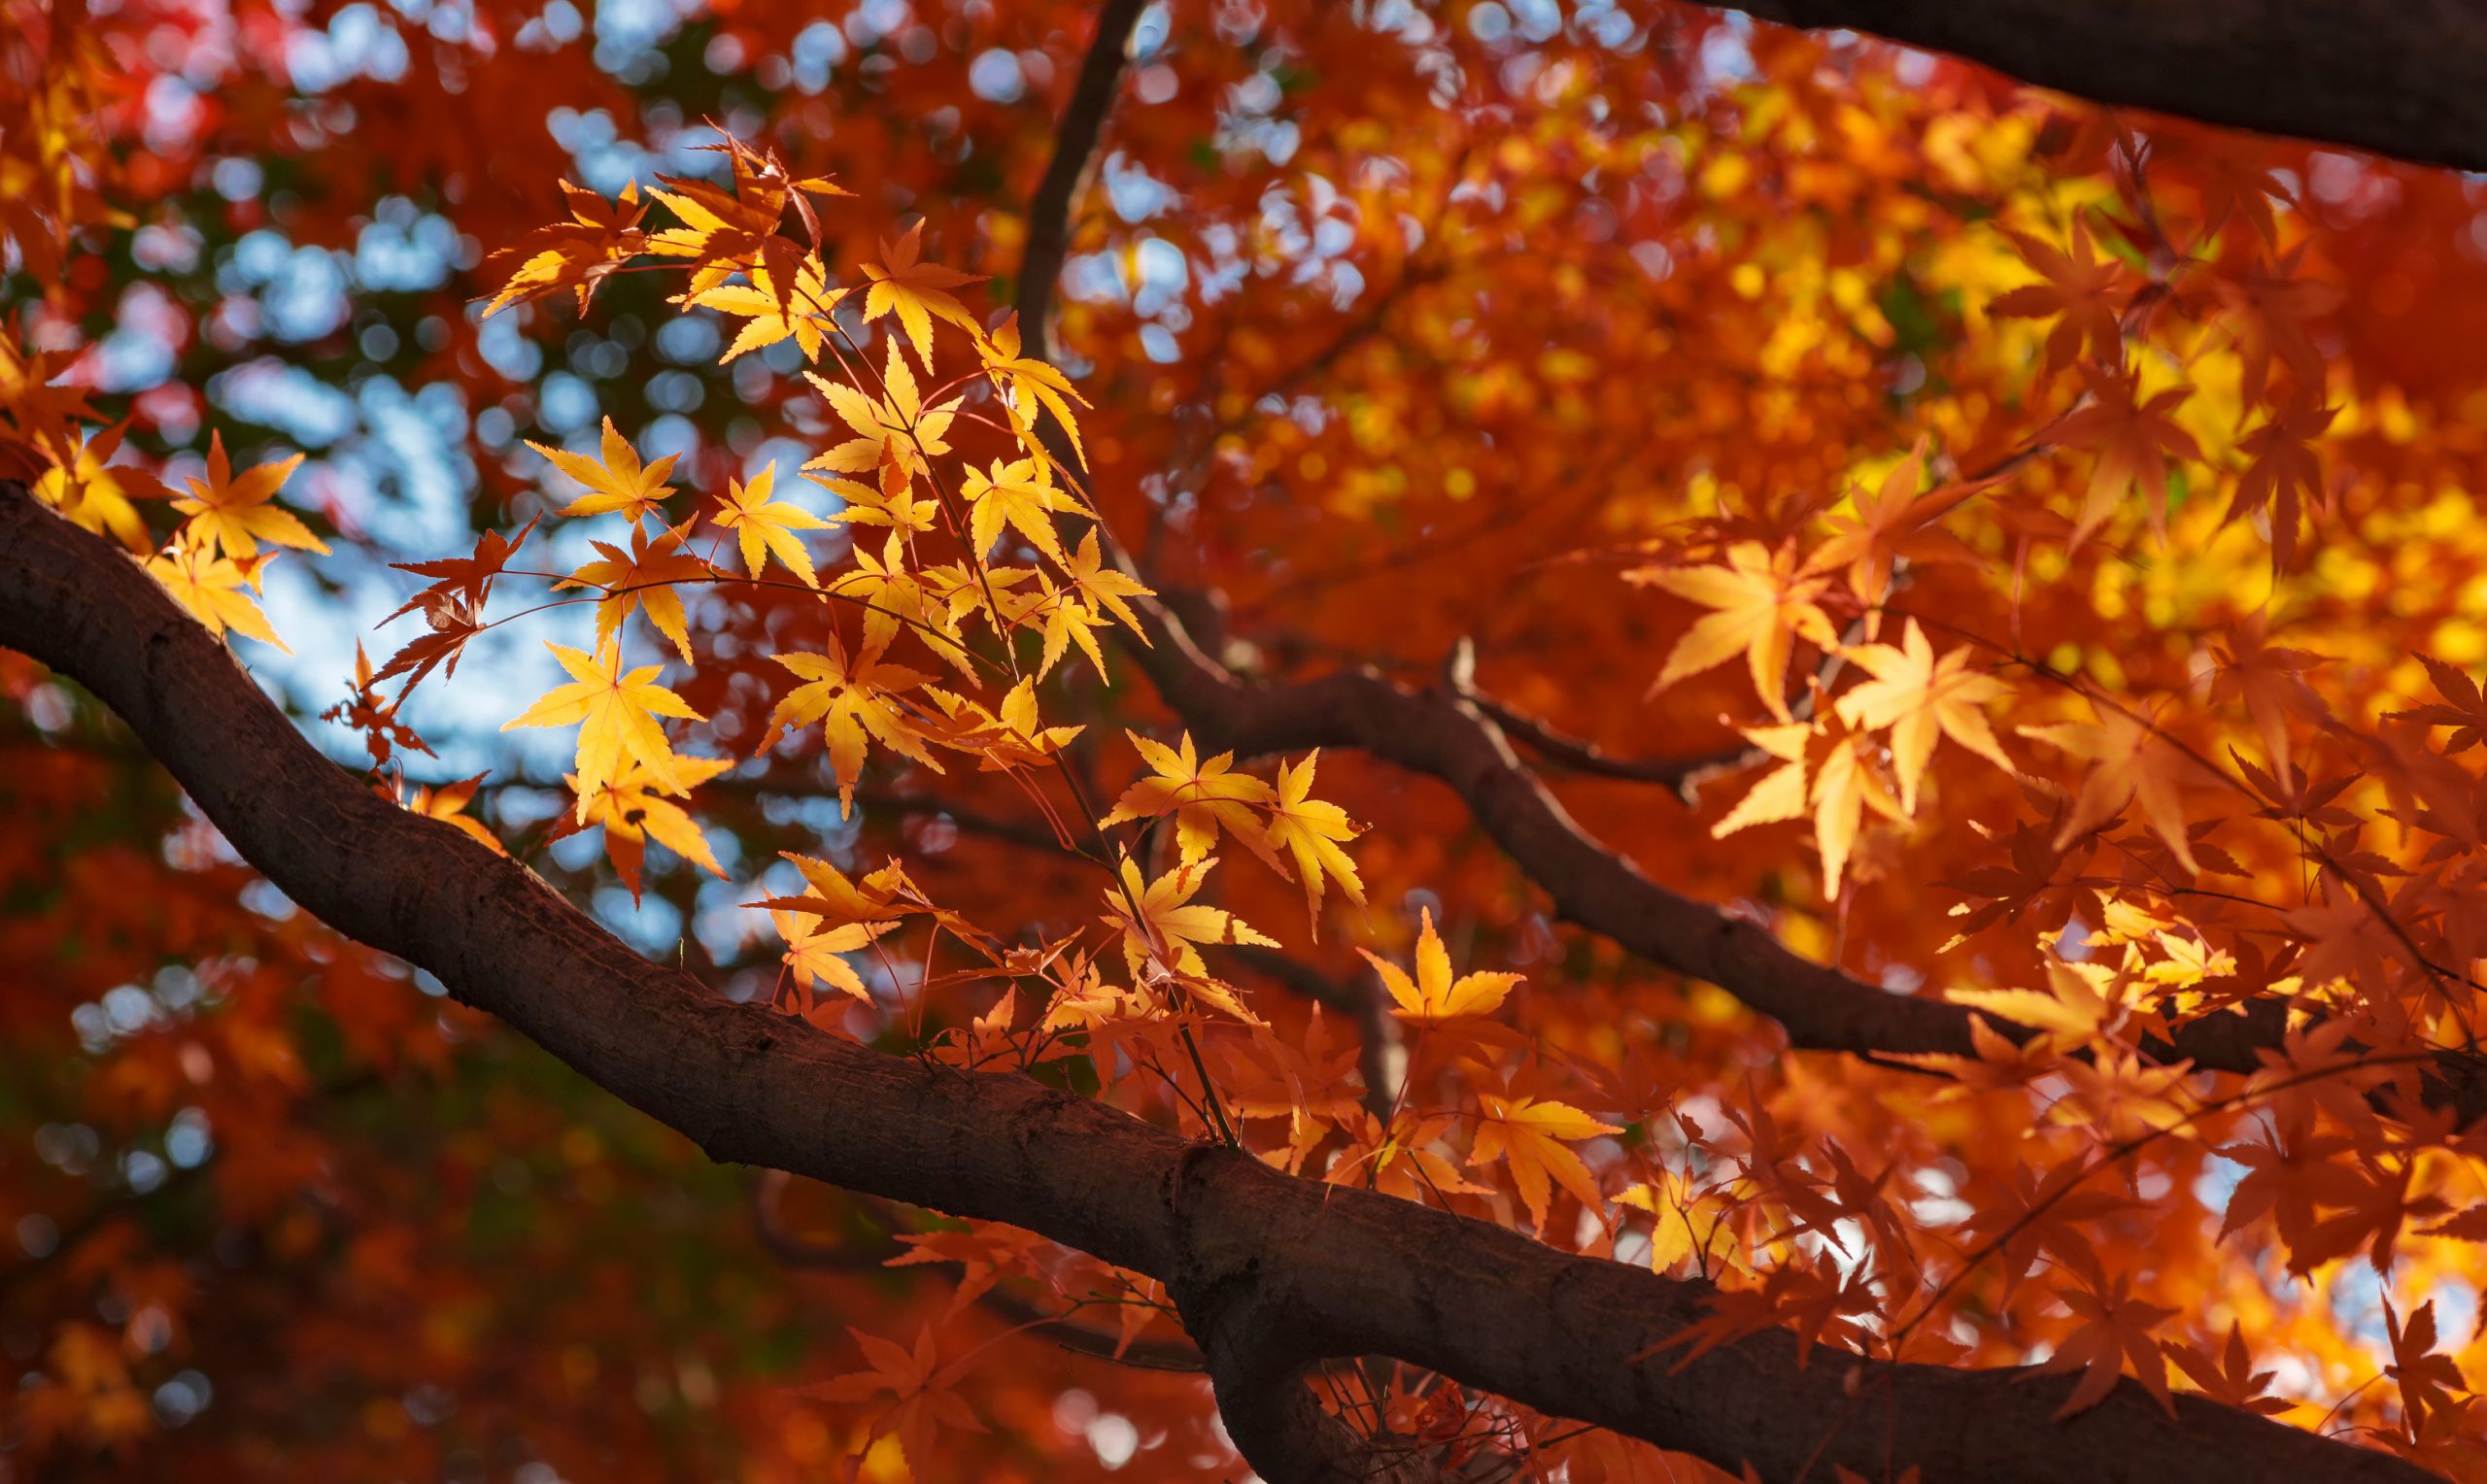 How to Care for Your Maple Tree Seedlings: 5 Simple Tips